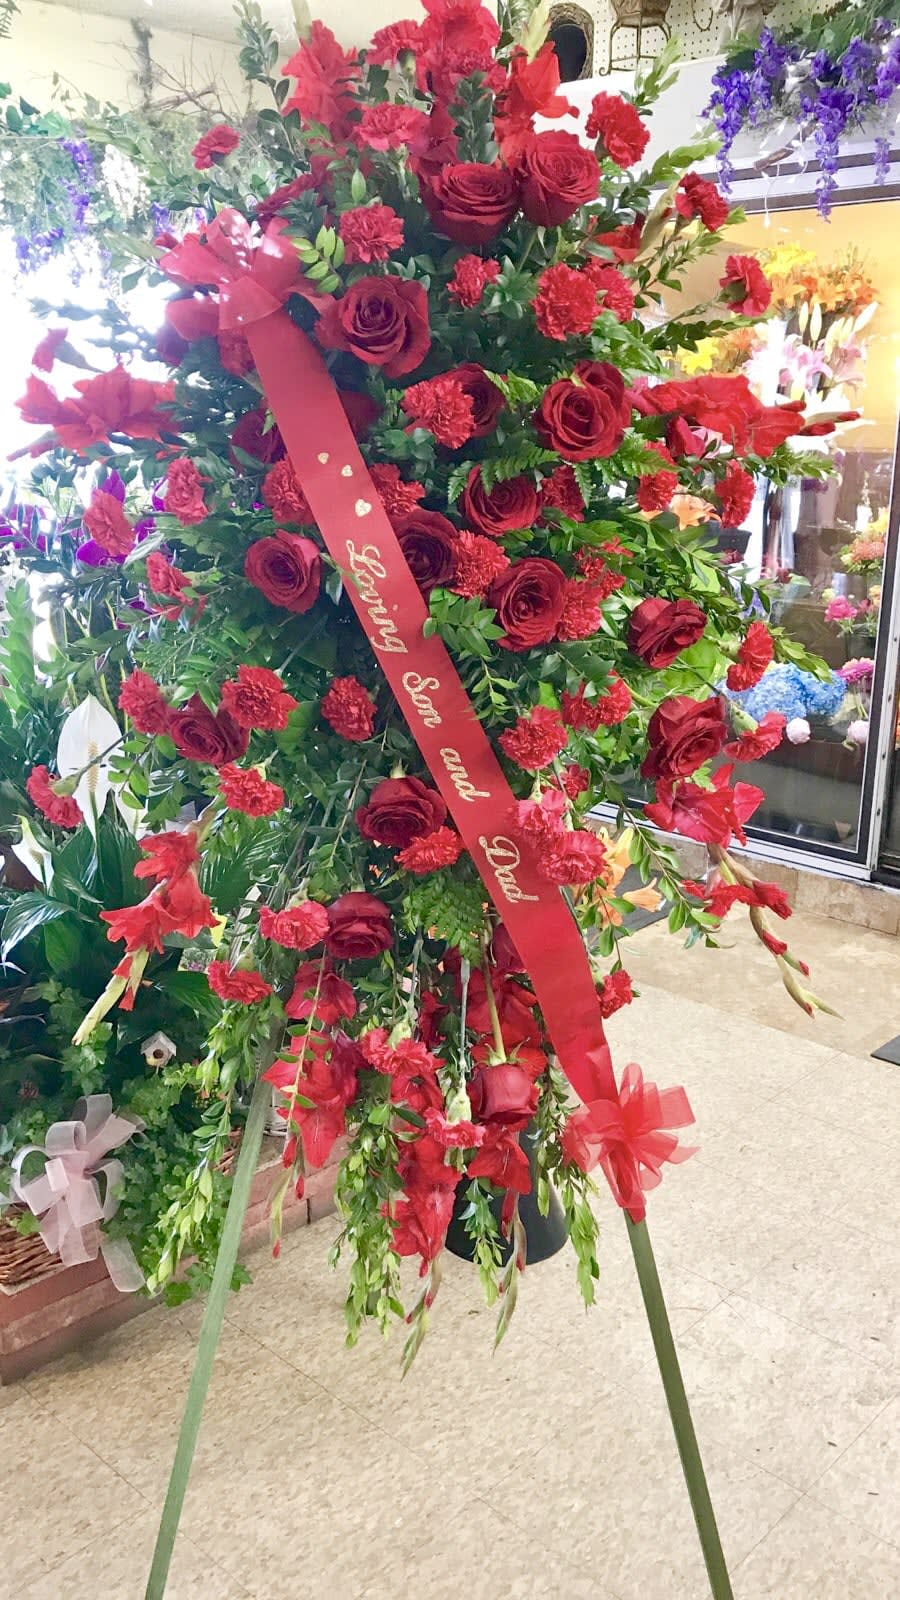 A grand tribute with red roses and carnations.